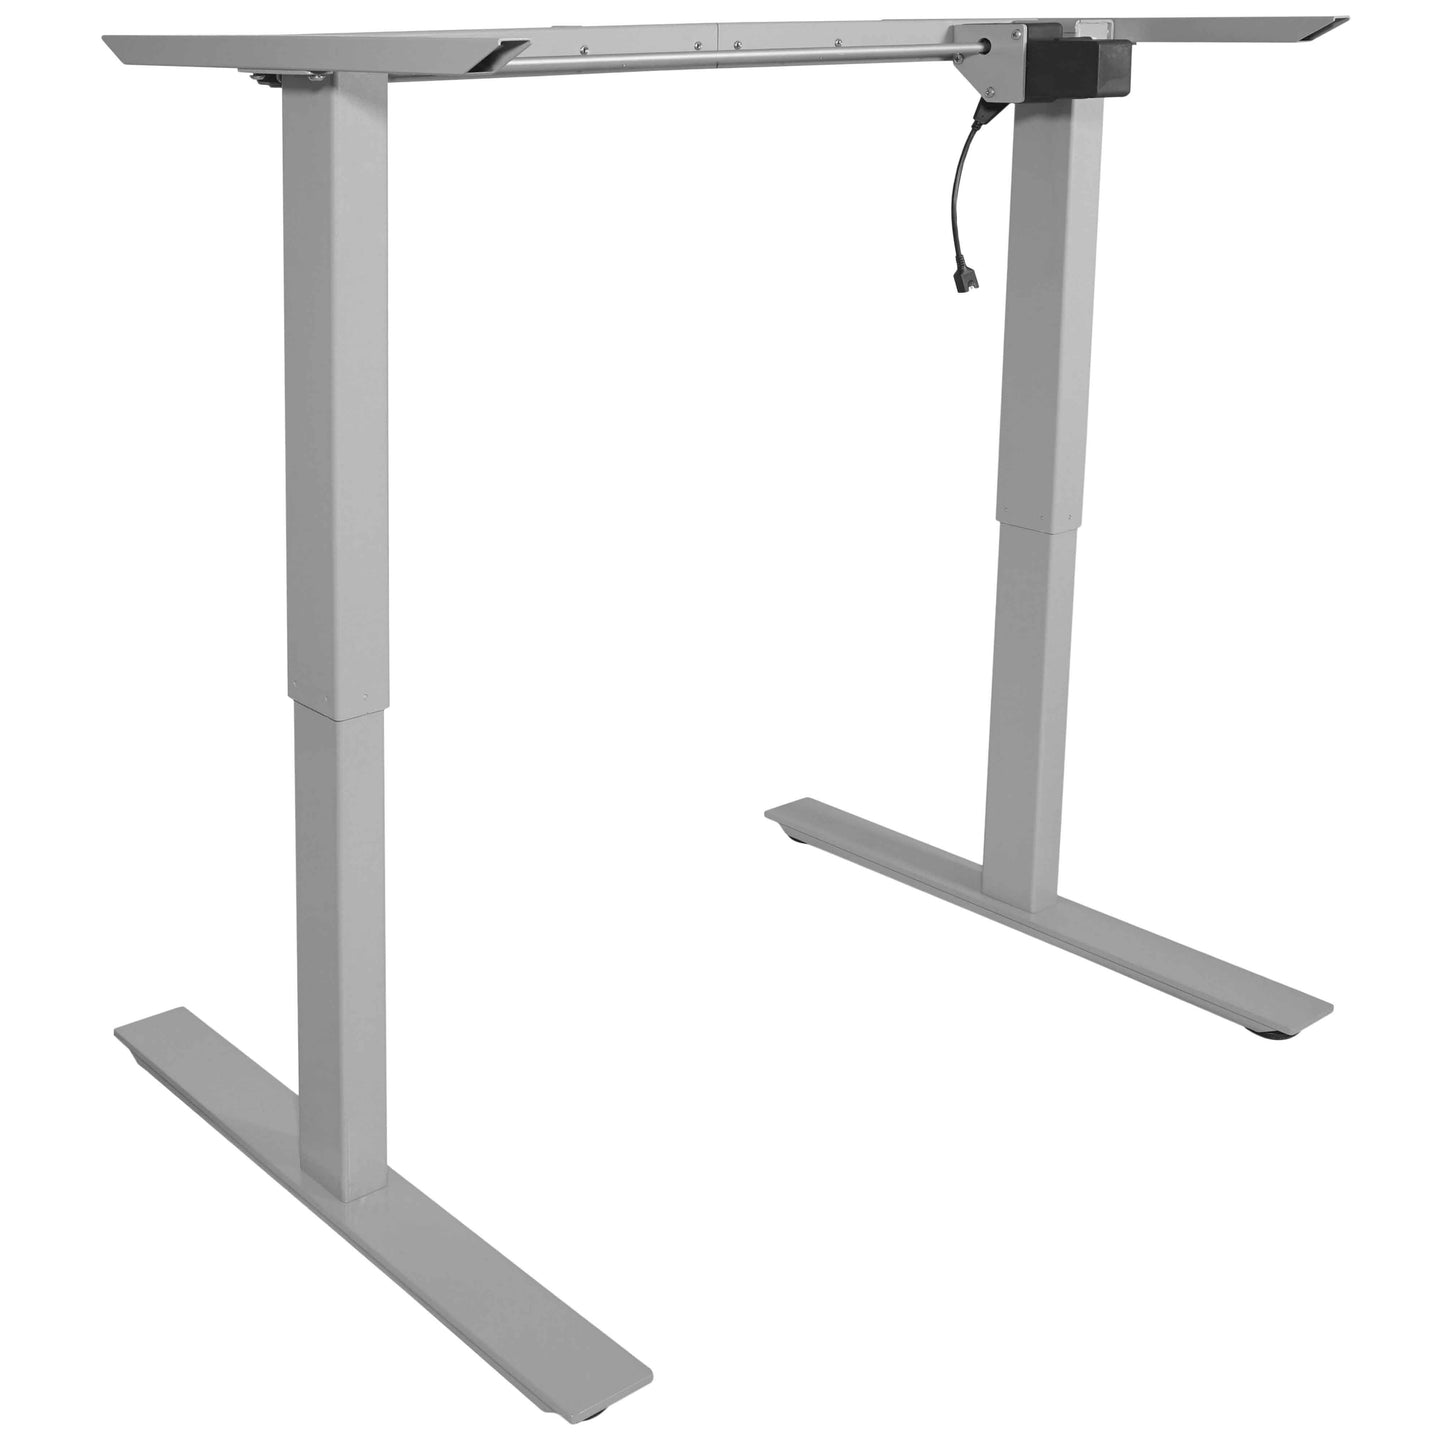 Single Motor Electric Adjustable Height A2 Sit-Stand Desk - view 5